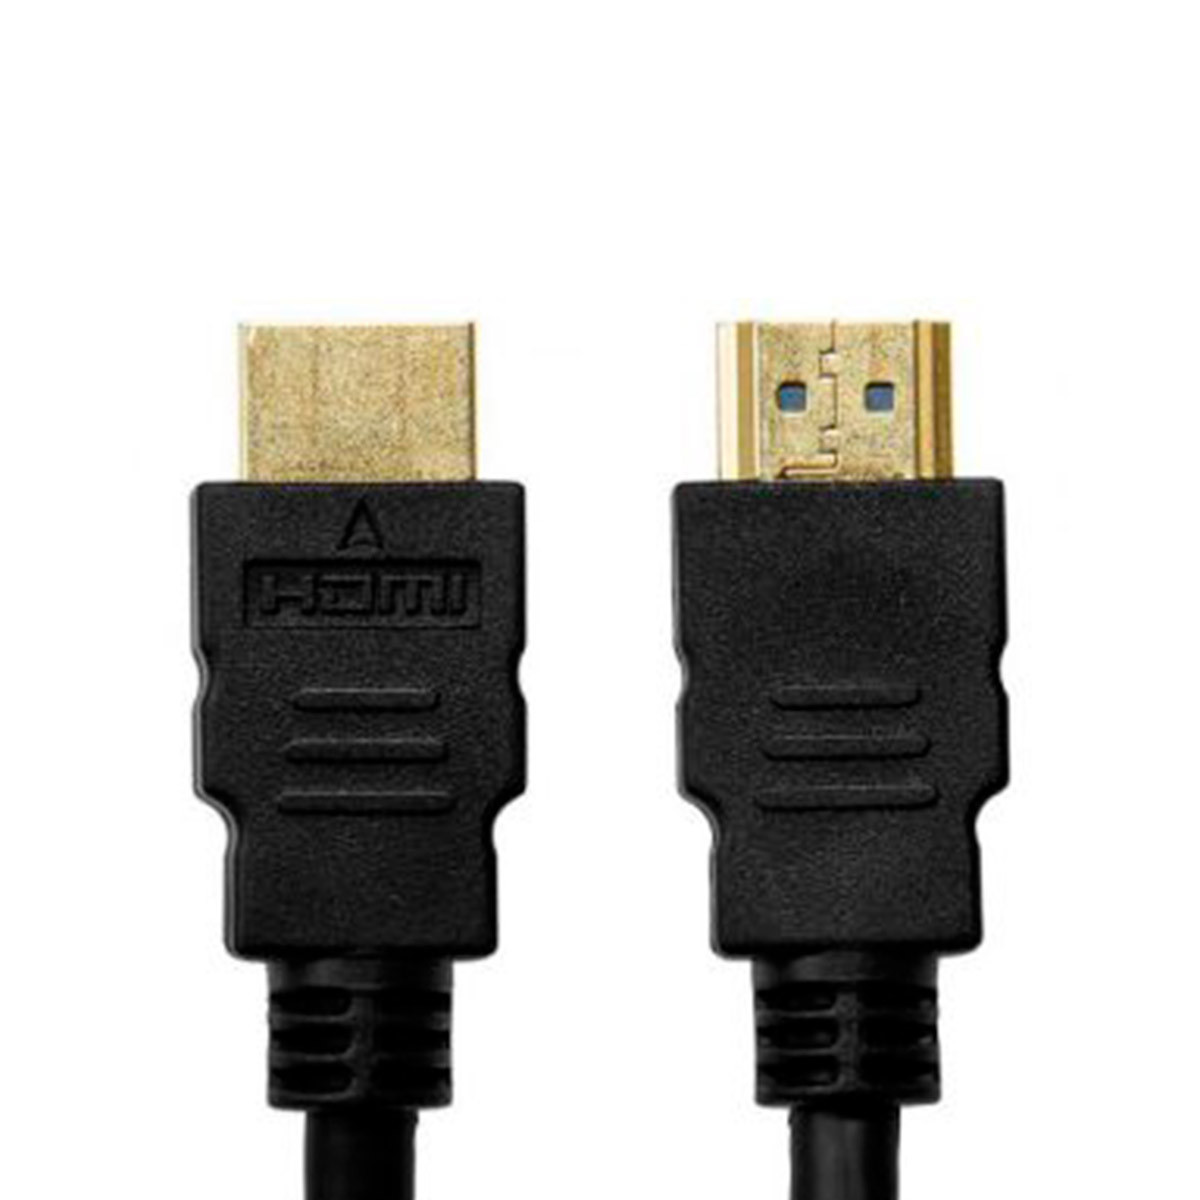 Cable Hdmi 2.0 Hd 3d 4k 60fps 3m Plano Ofc Xtech Xtc-620